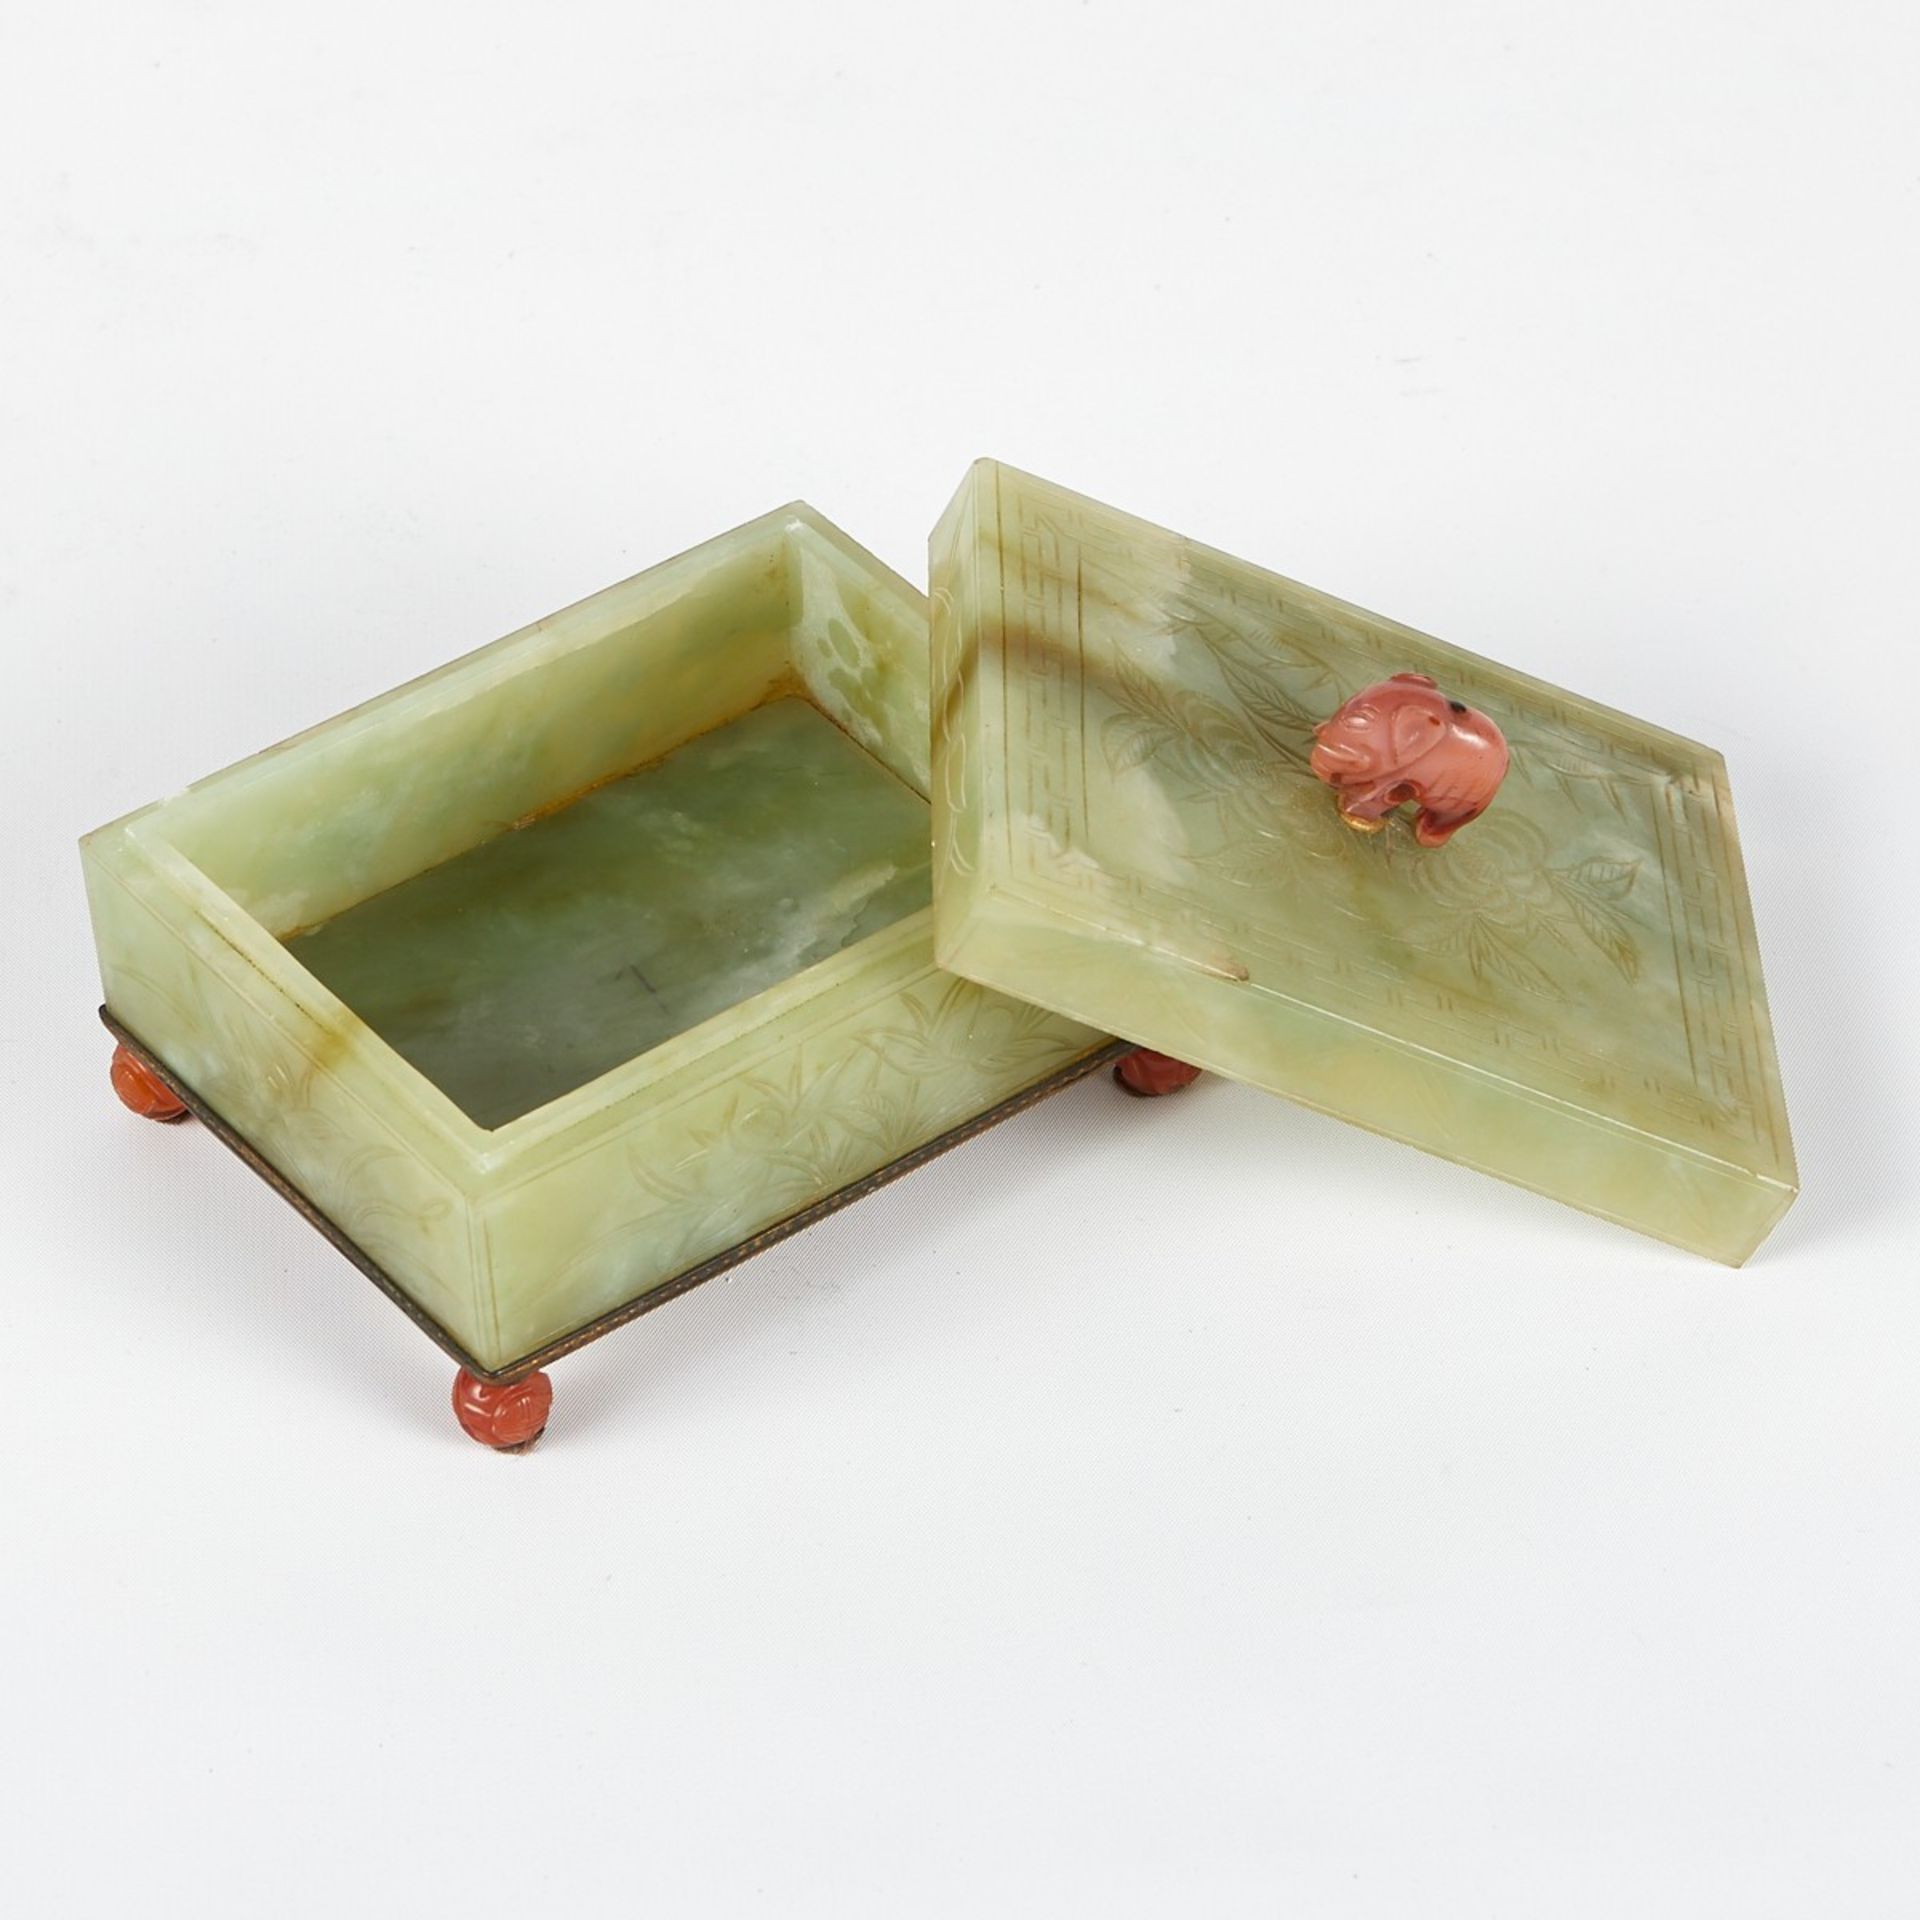 Grp: 3 Small Jade Stone Boxes - Image 10 of 11